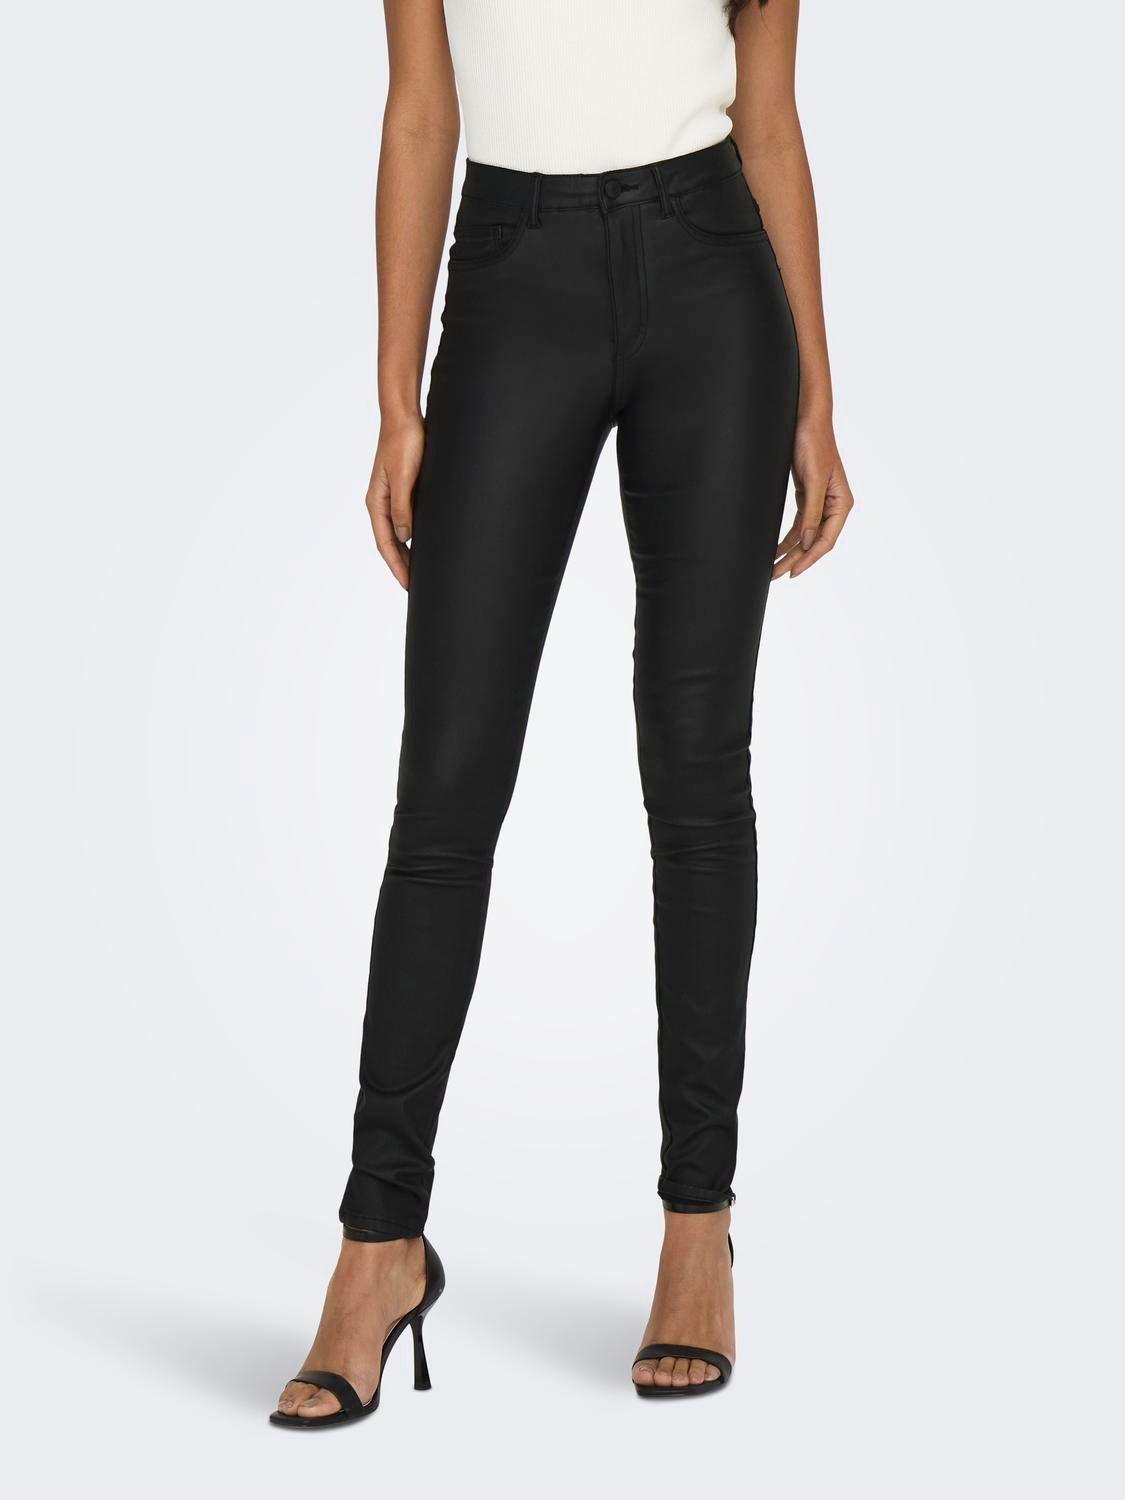 ONLY Skinny Fit High waist Trousers -Black - 15159341